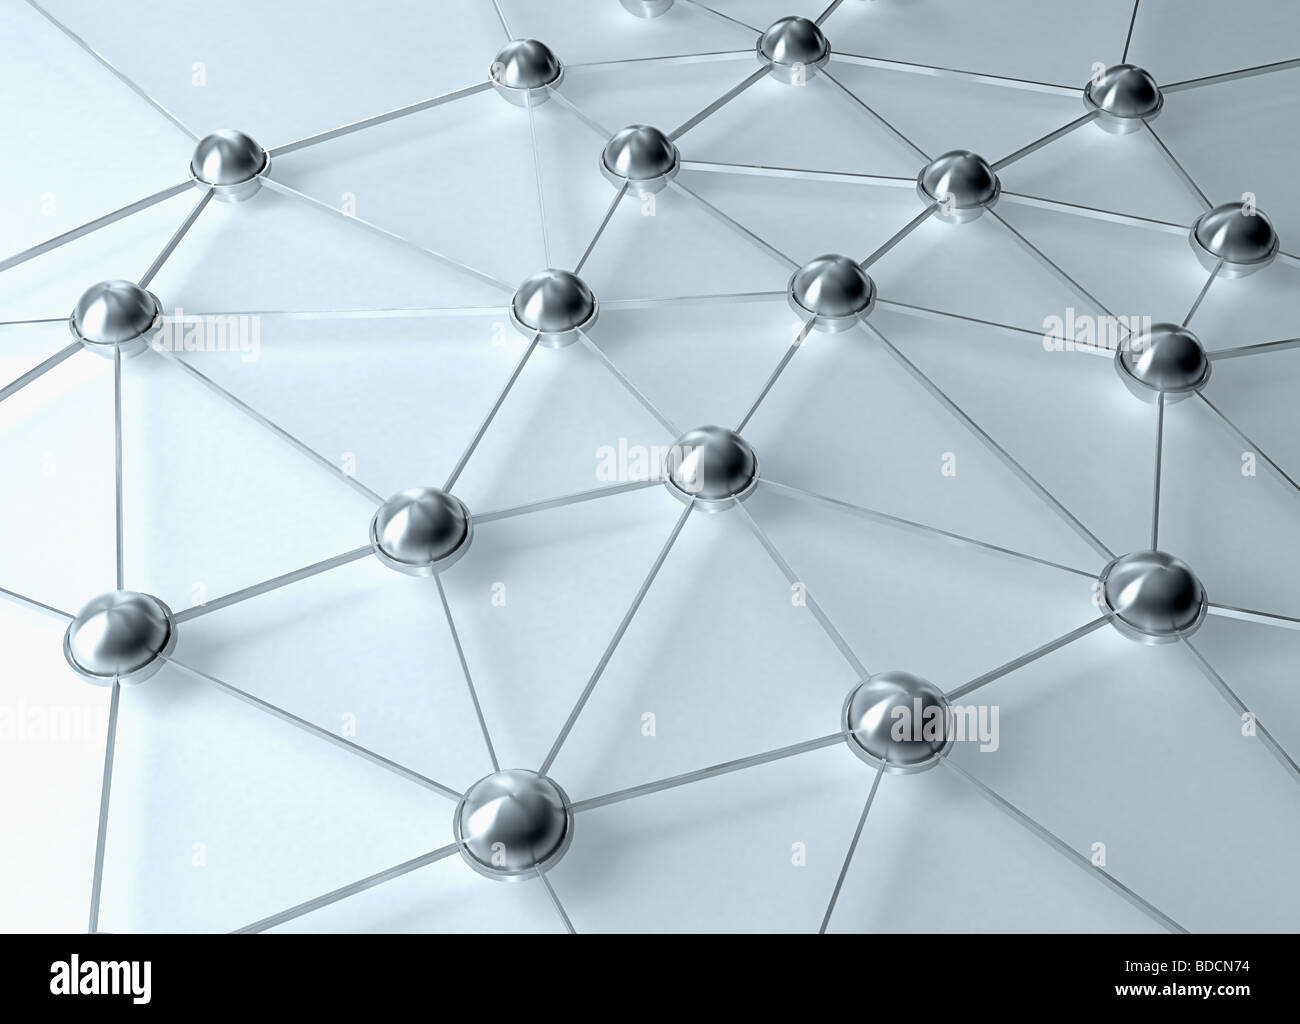 3d abstract hierarchy structure or a network image Stock Photo